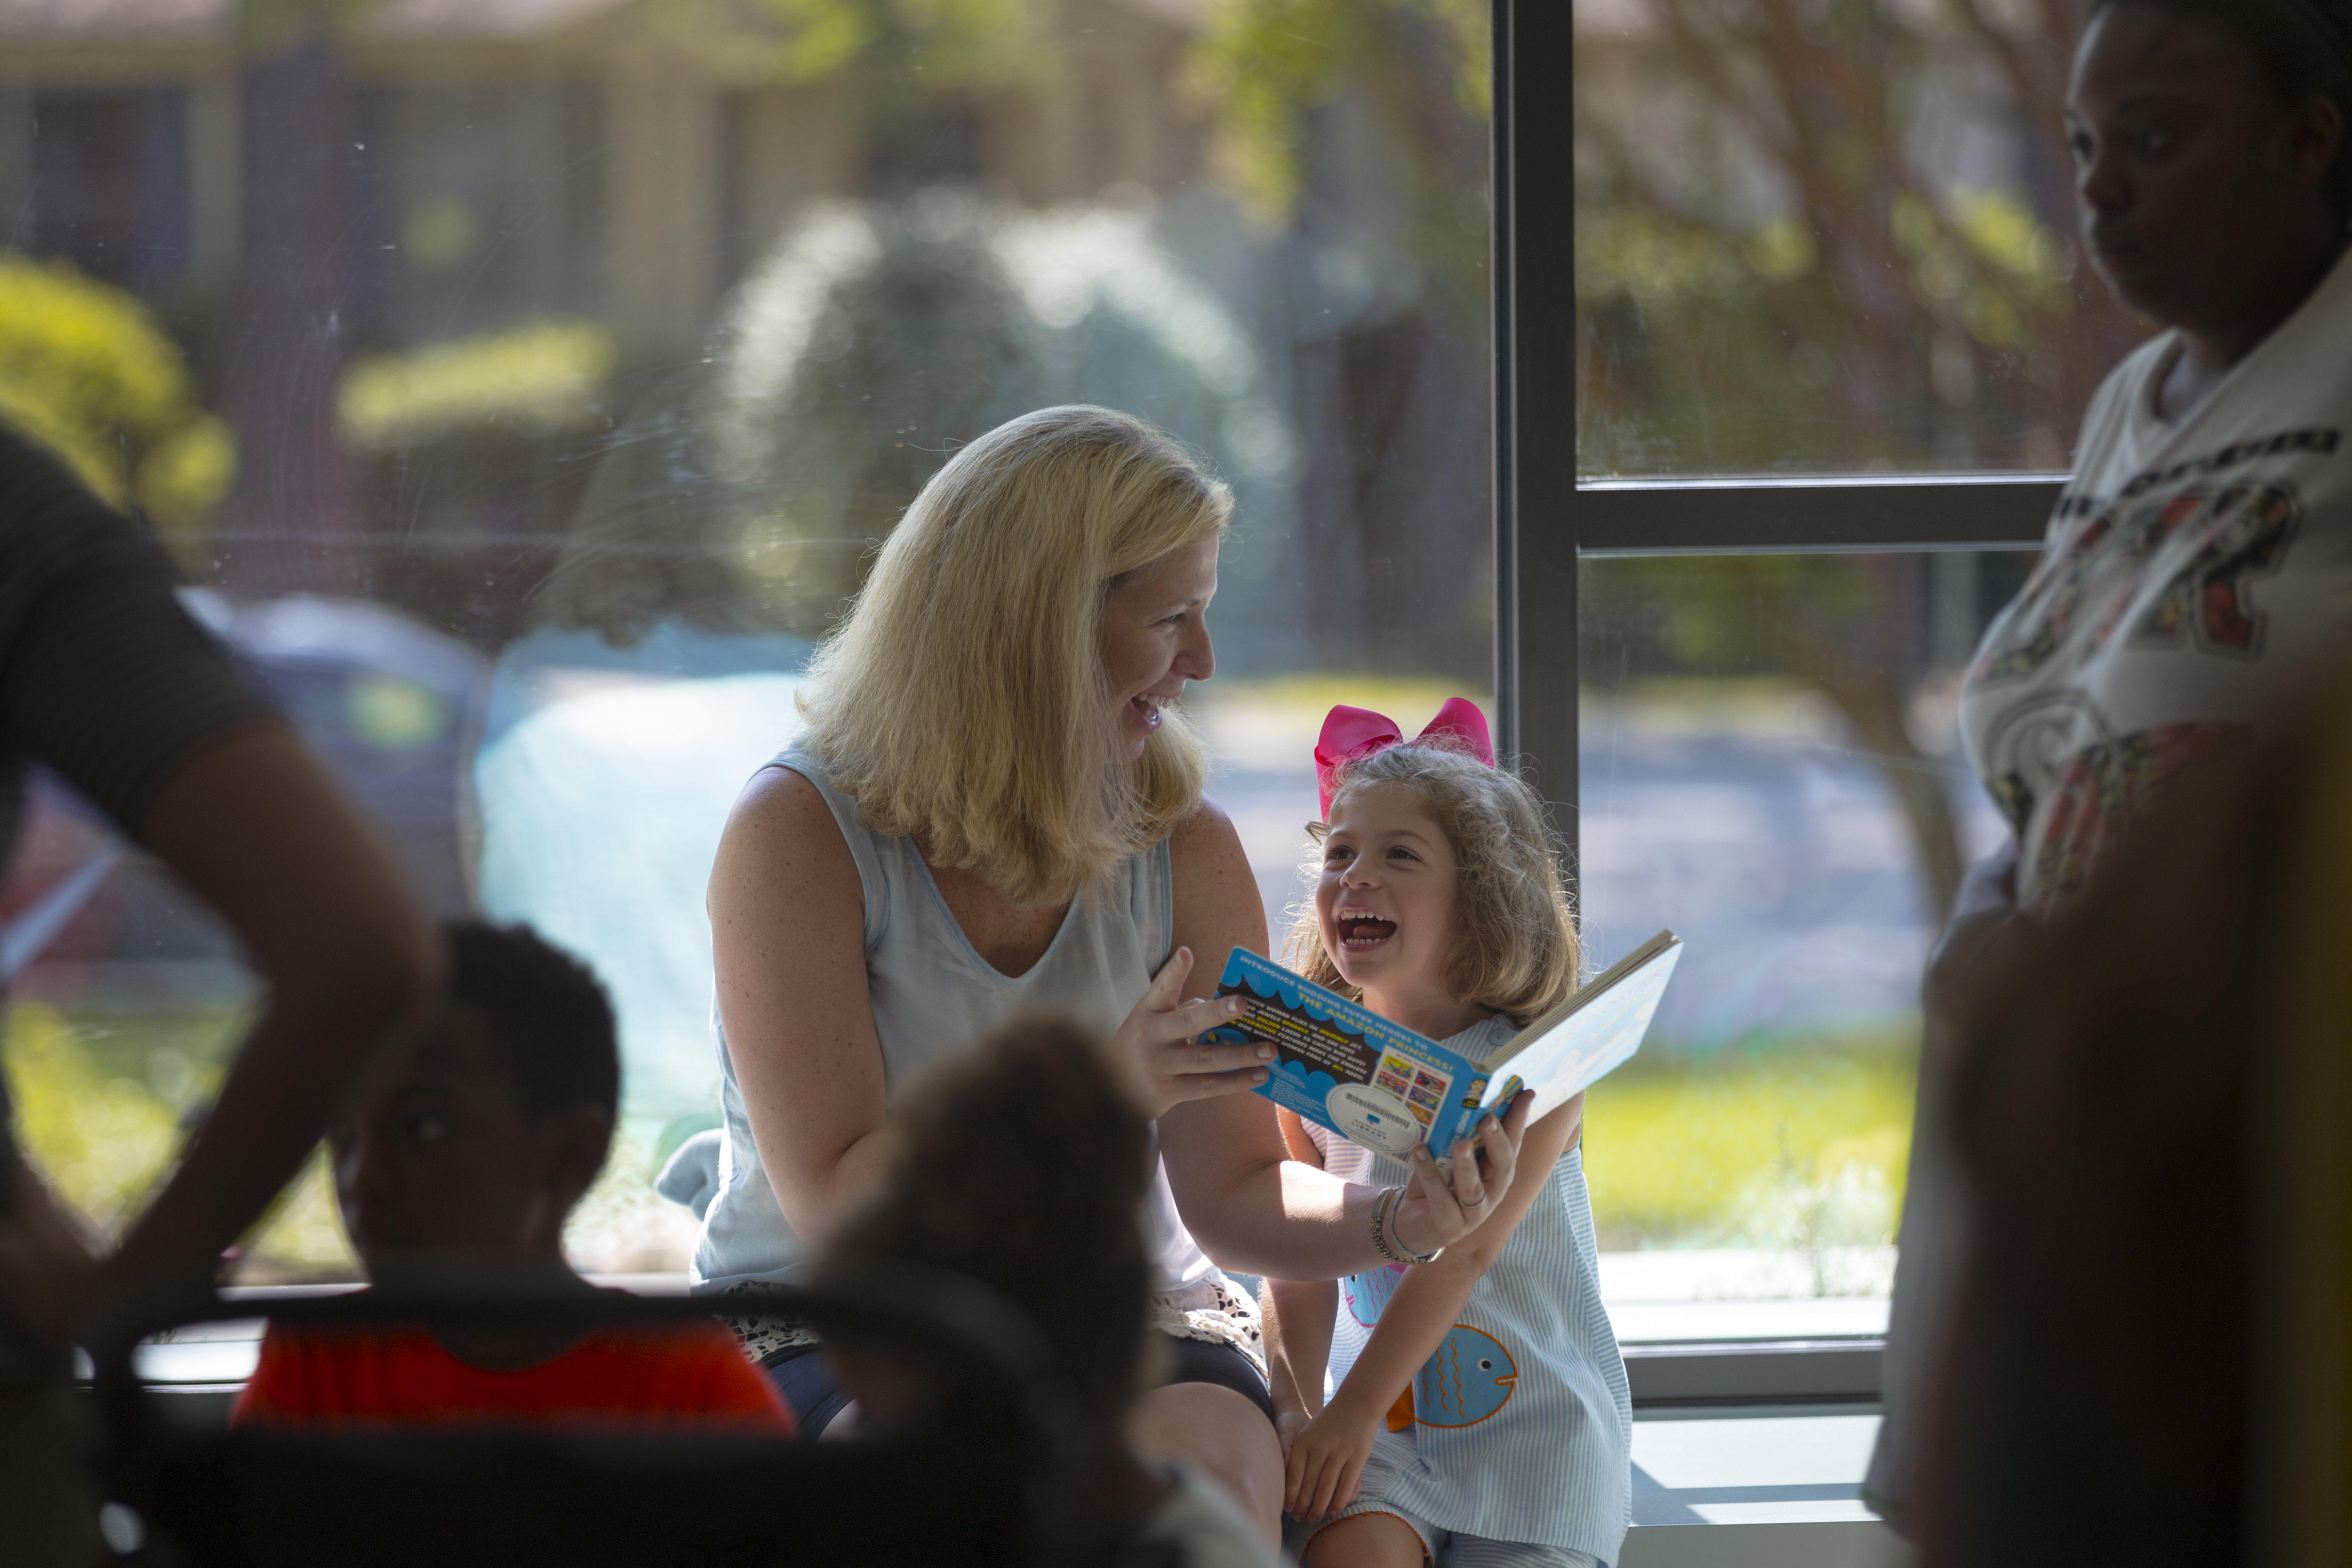 A White Mother and daughter read together in the window seat at Richland Library Cooper